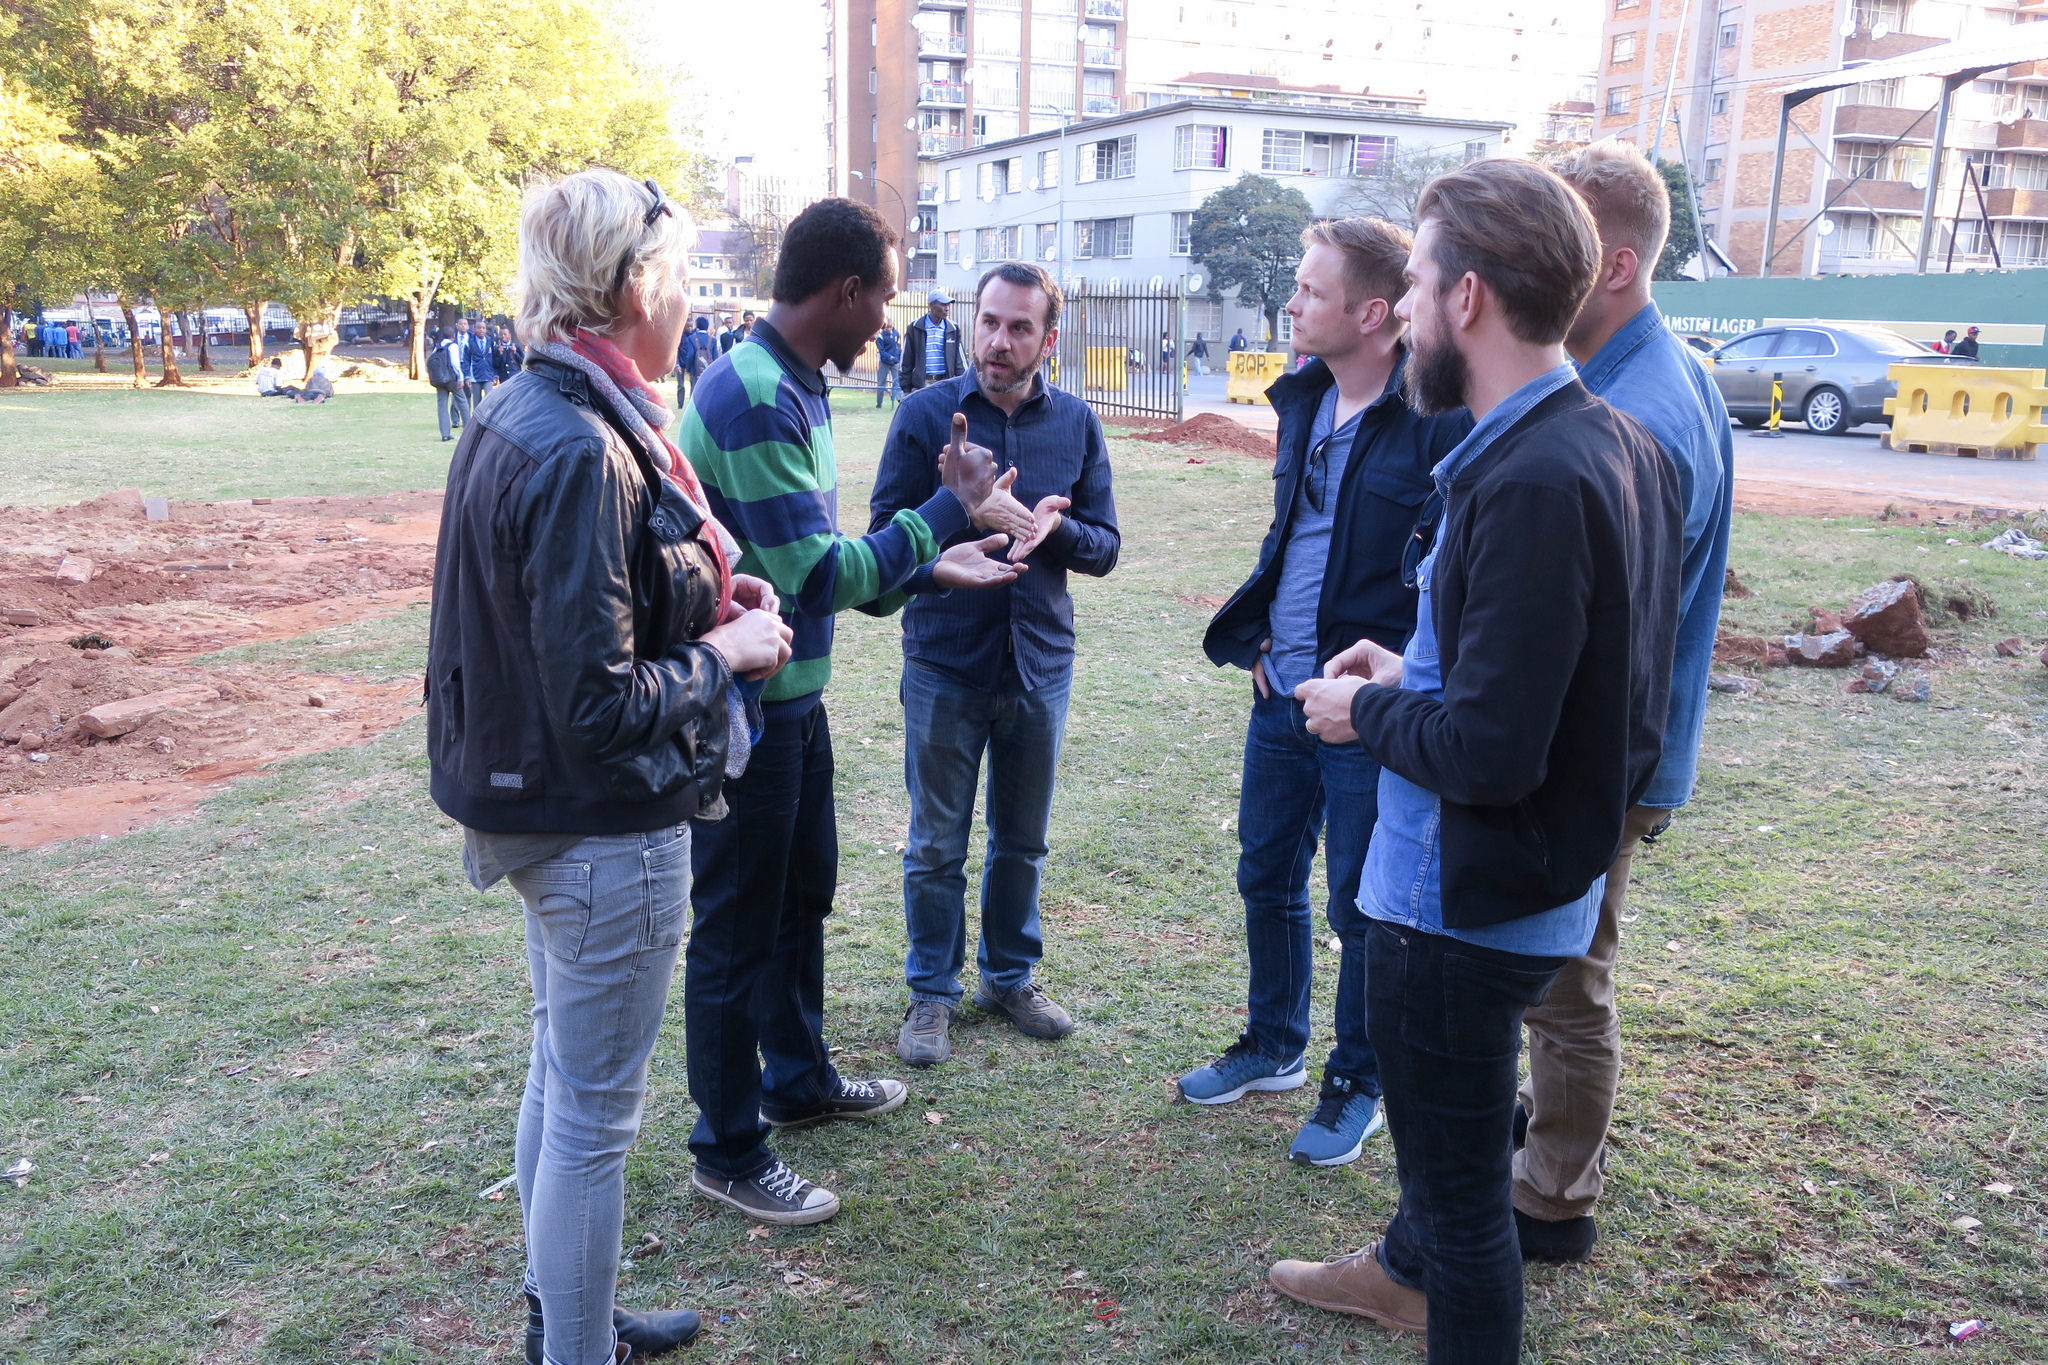 Project partners discuss the public space challenges in the Braamfontein district of Johannesburg before piloting the mixed reality technology.